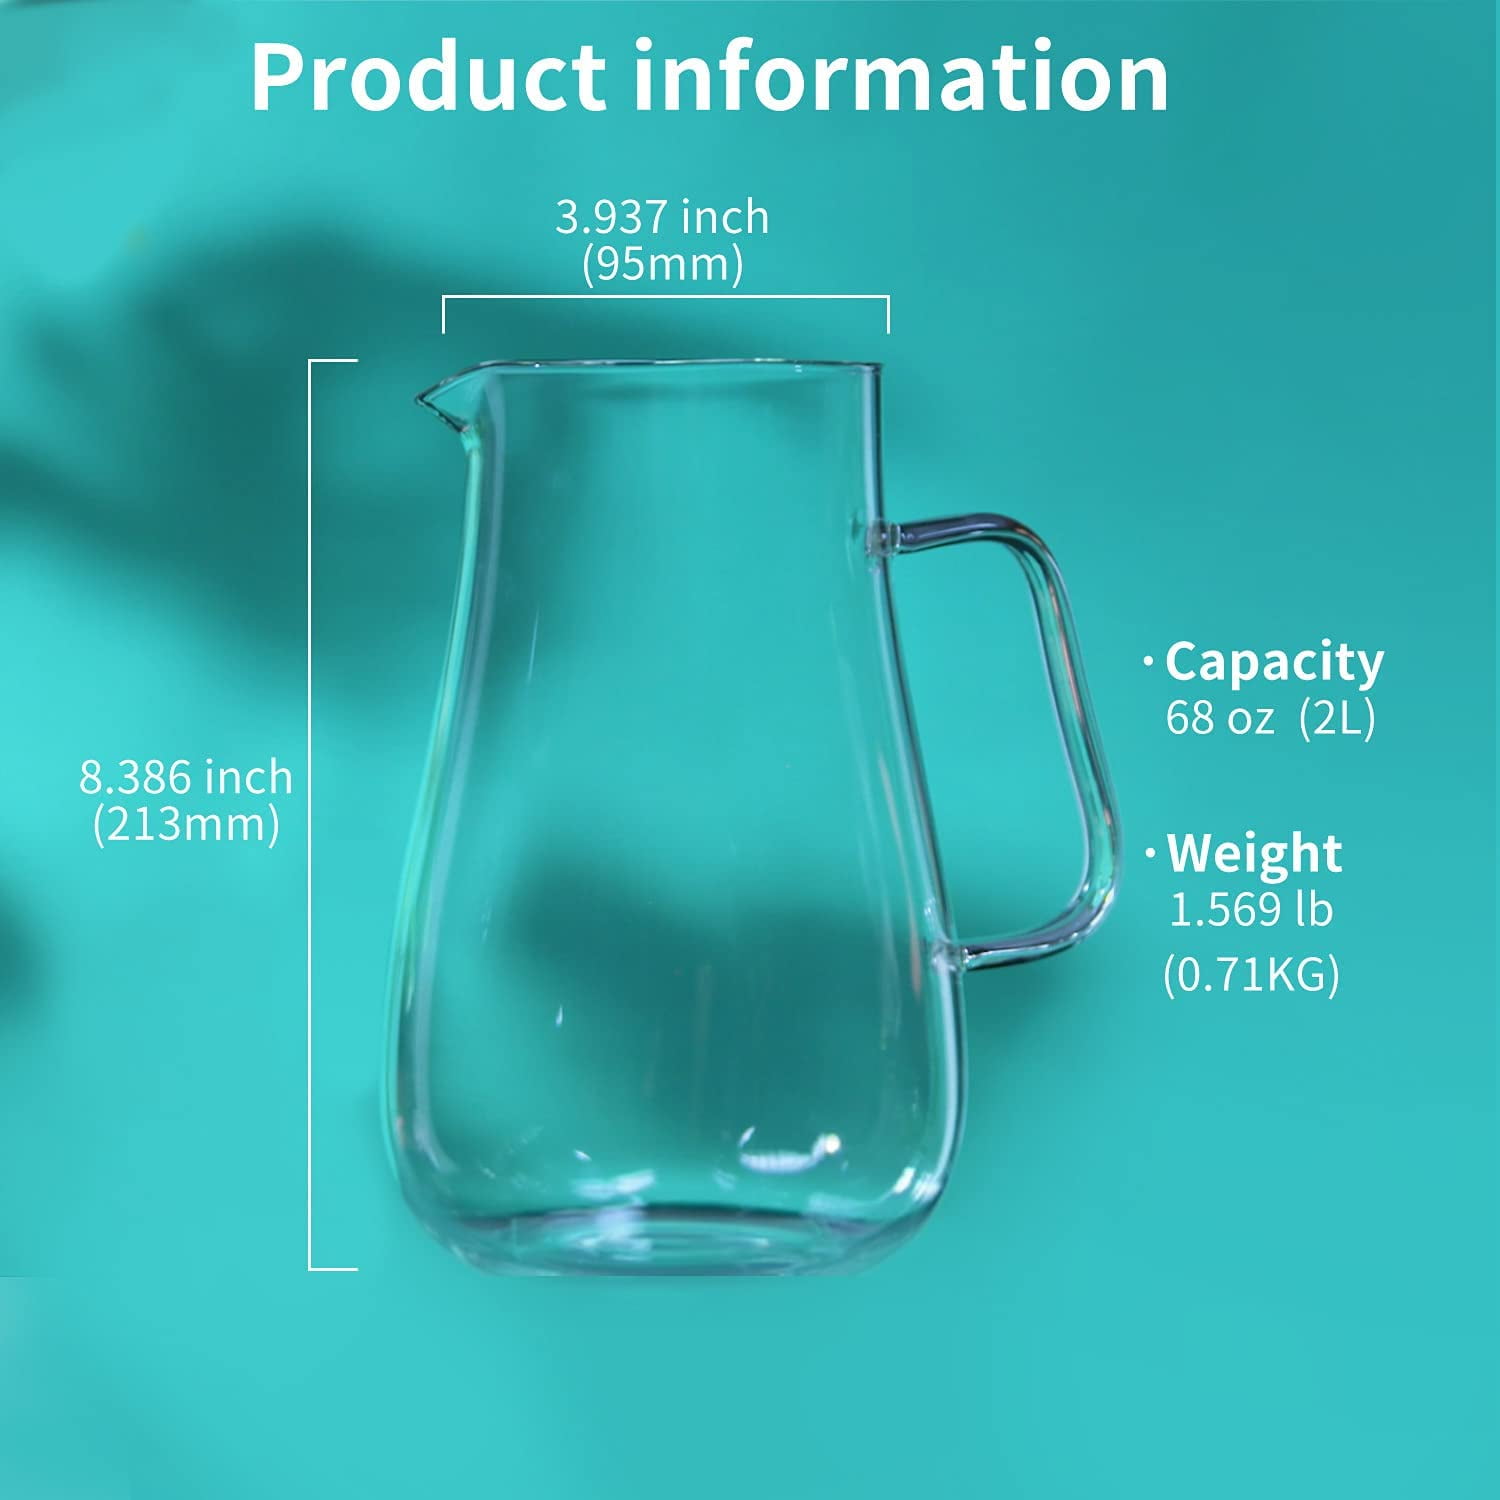  Glass Pitcher, veecom 105 Oz Large Pitcher with Lid